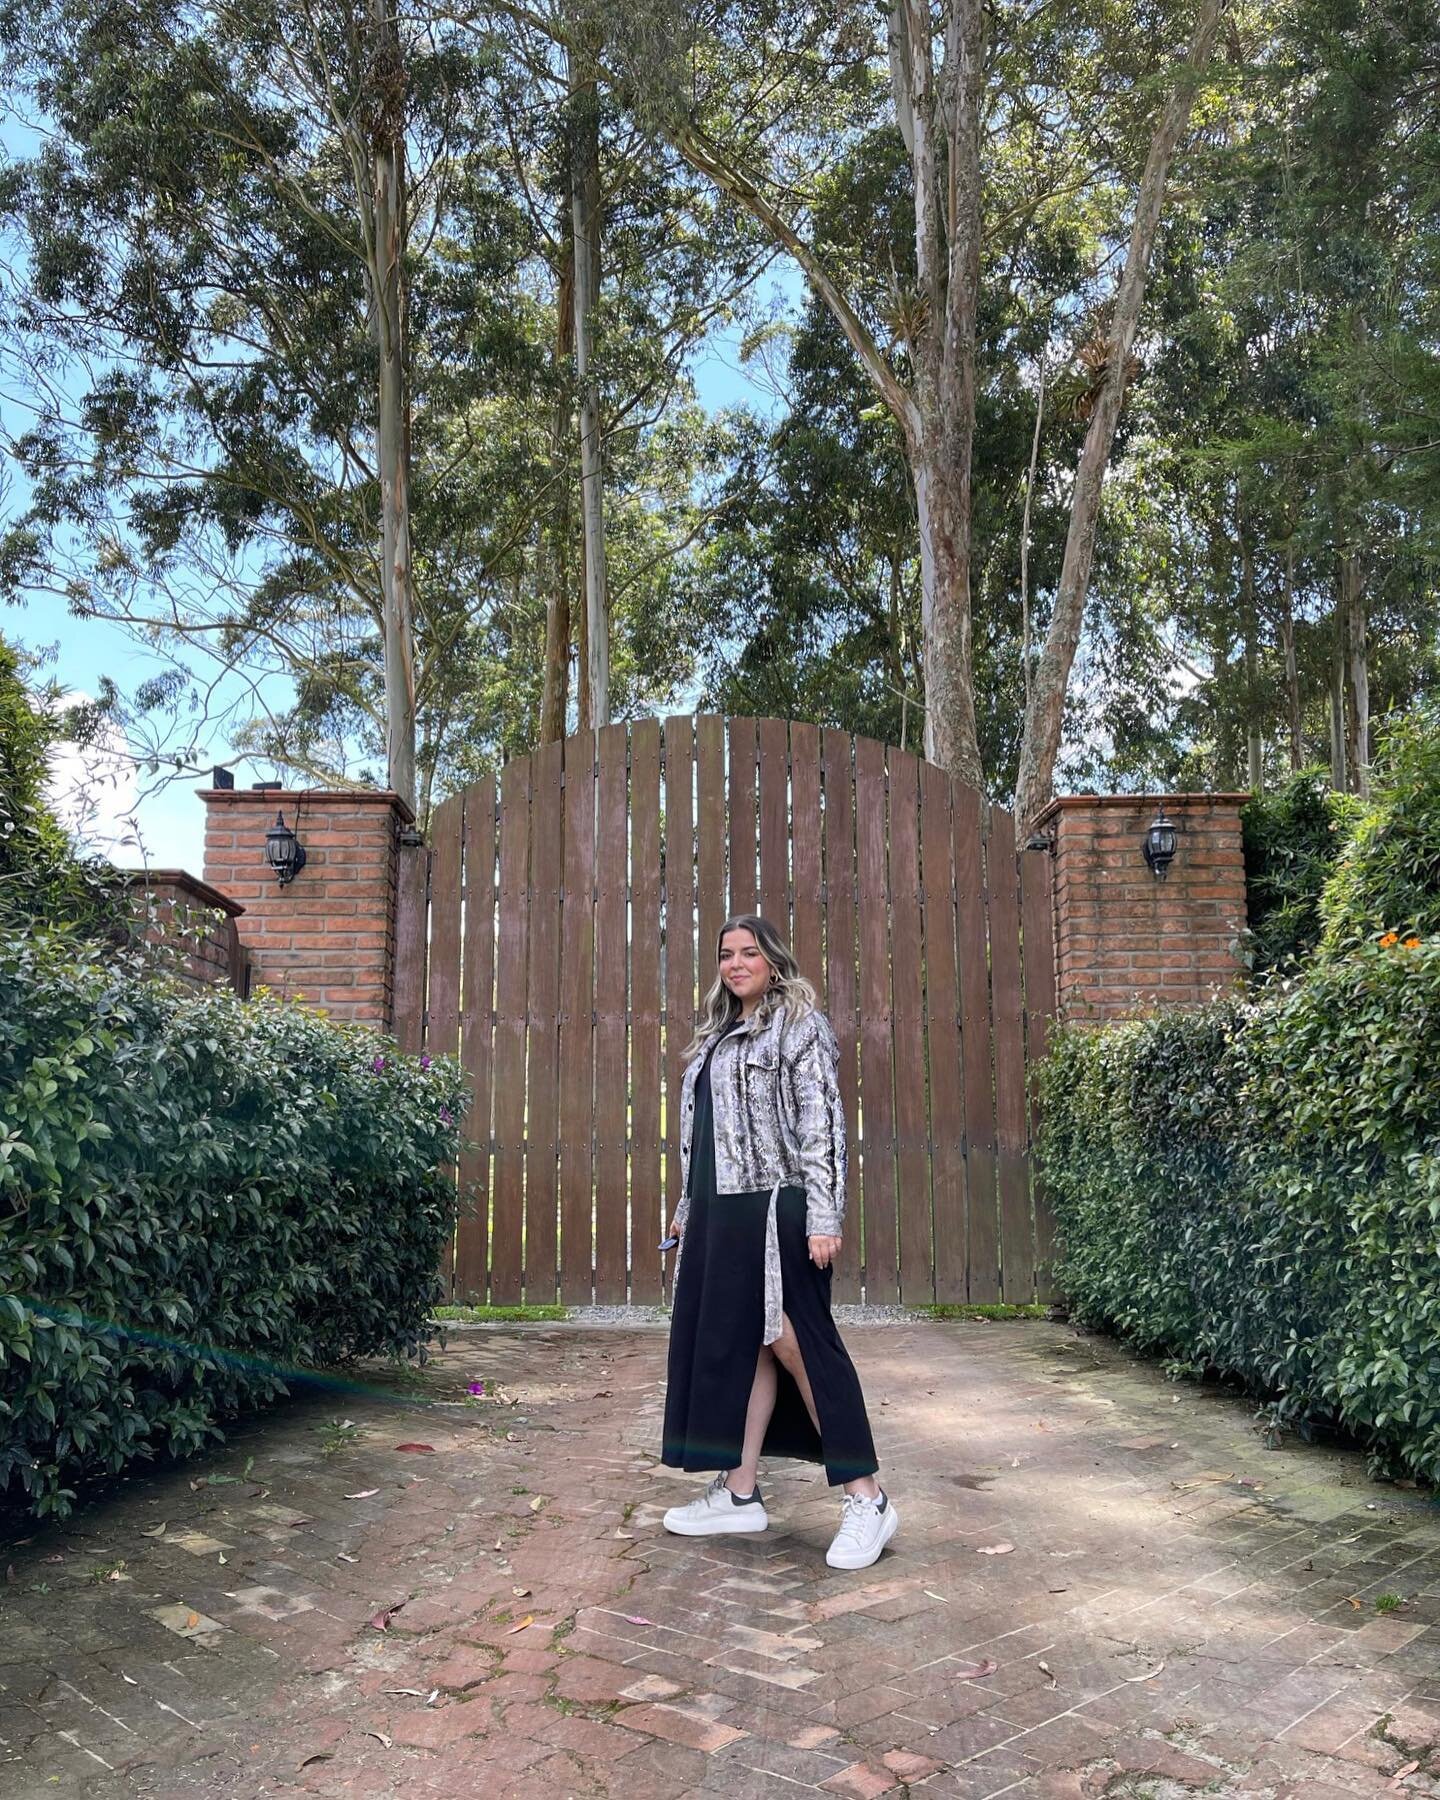 Had the most amazing time visiting our wedding venue during my last trip to Colombia 🇨🇴

It was completely unplanned and unexpected but so amazing! I got goosebumps just standing in front of the gates ✨

Outfit details linked on my blog (link in bi